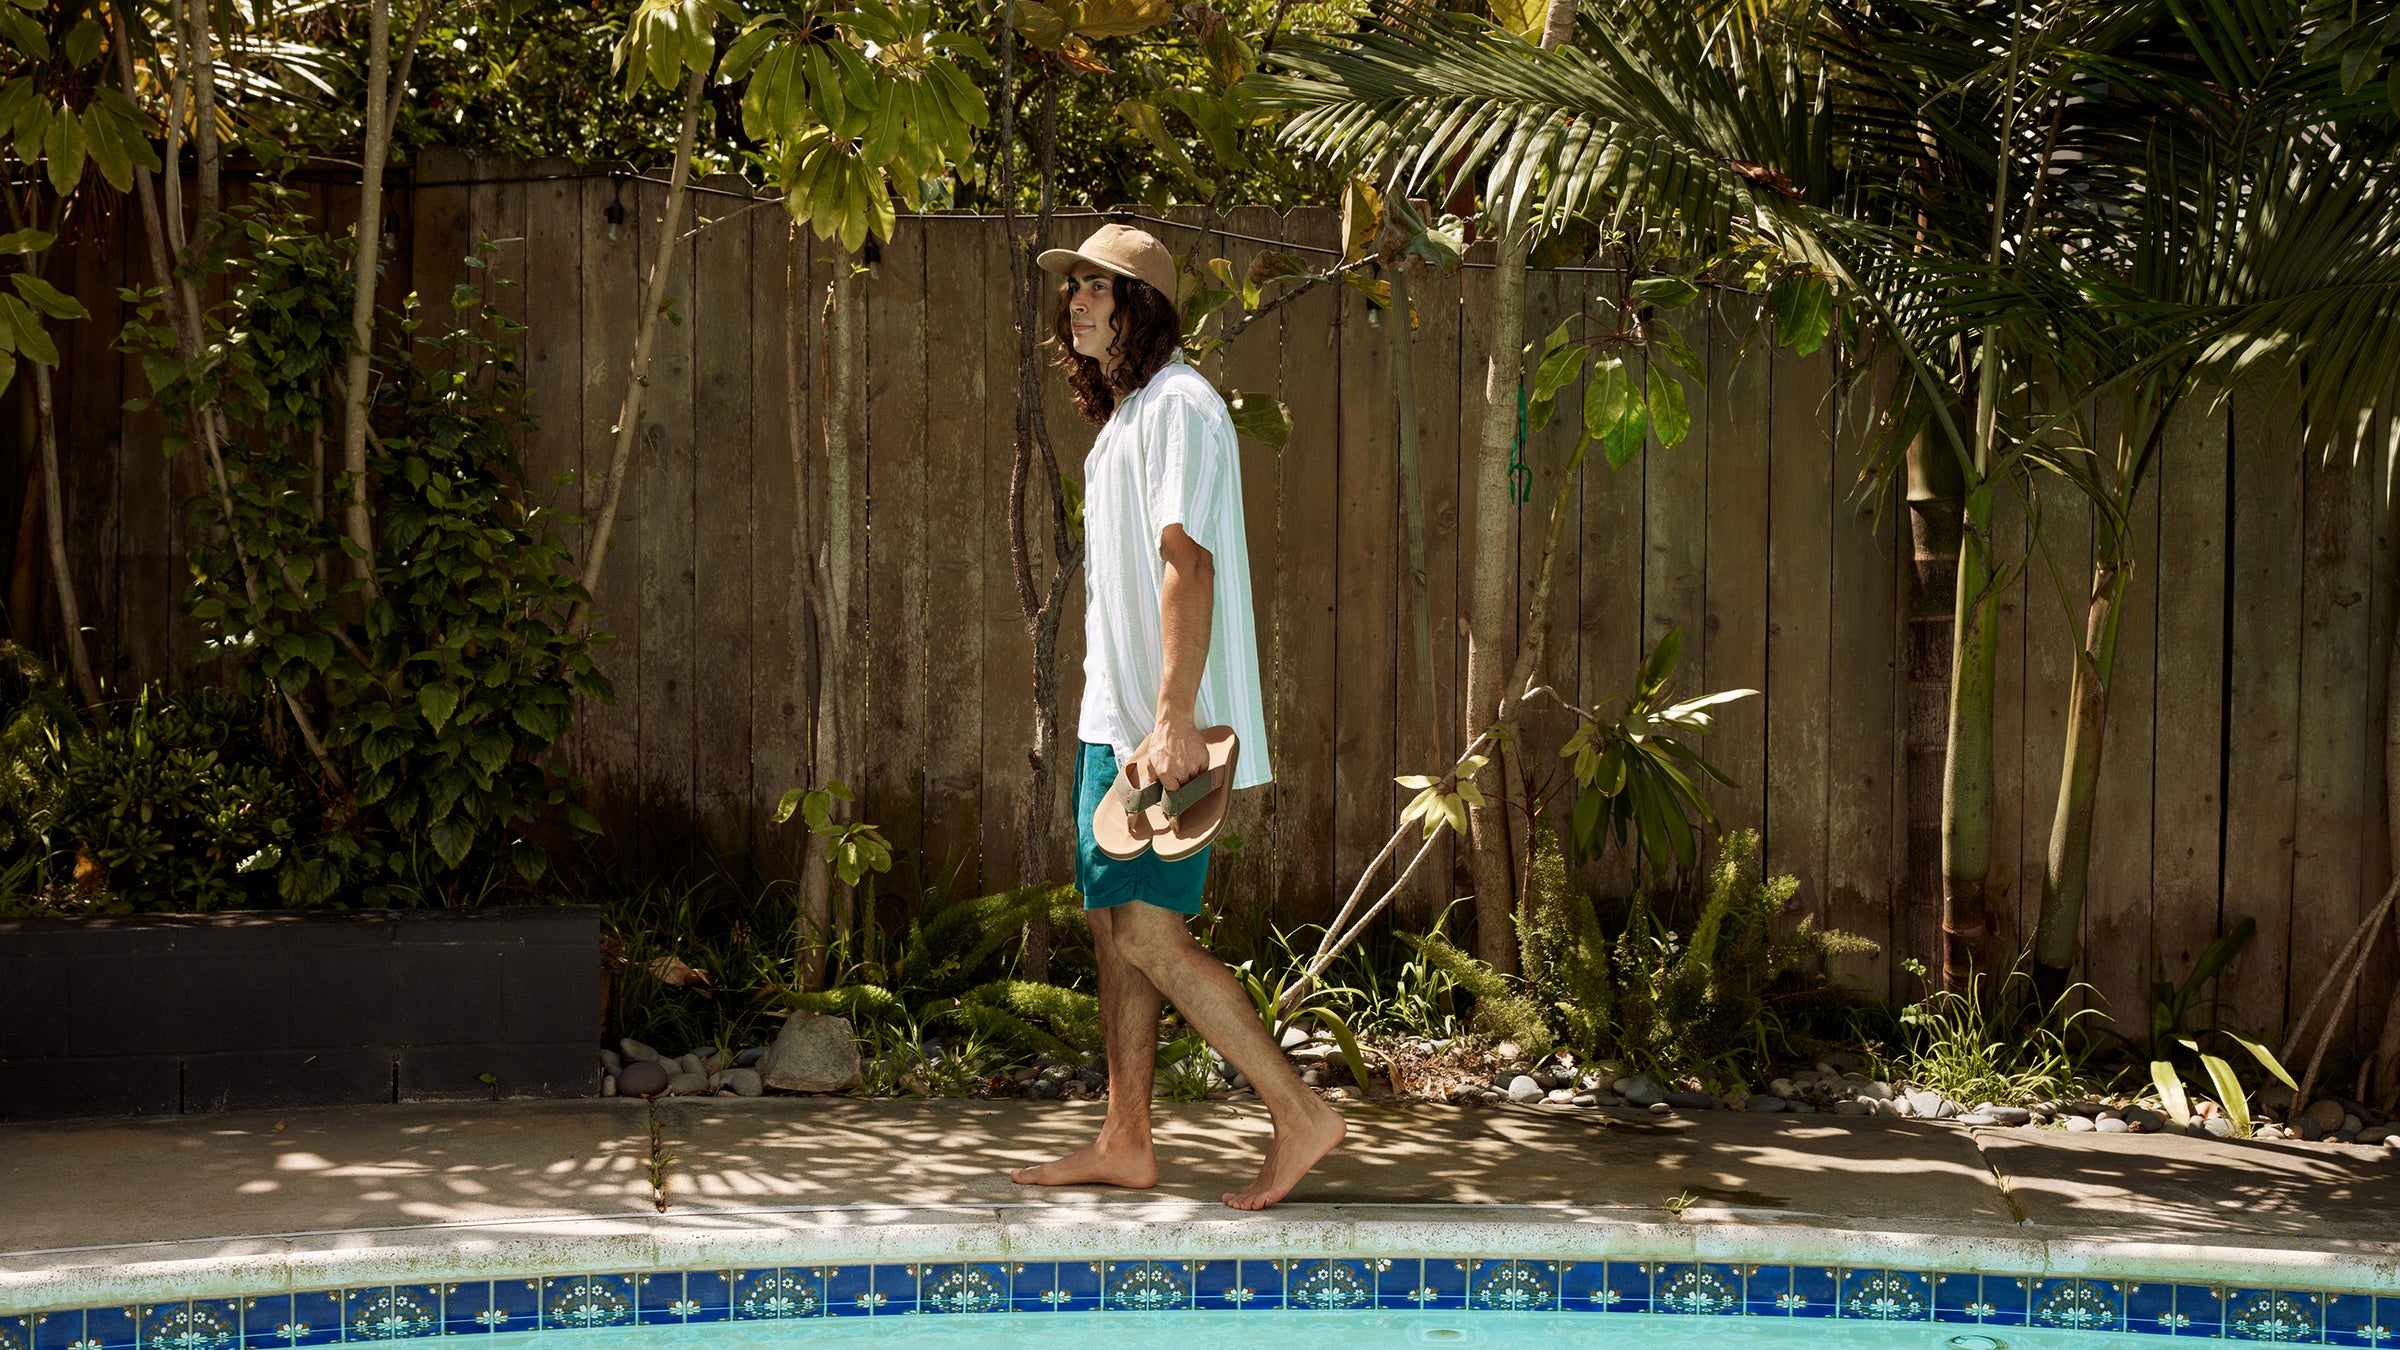 Model holding ARV 2 Sage while walking alongside a pool in a tropical backyard #color_sage